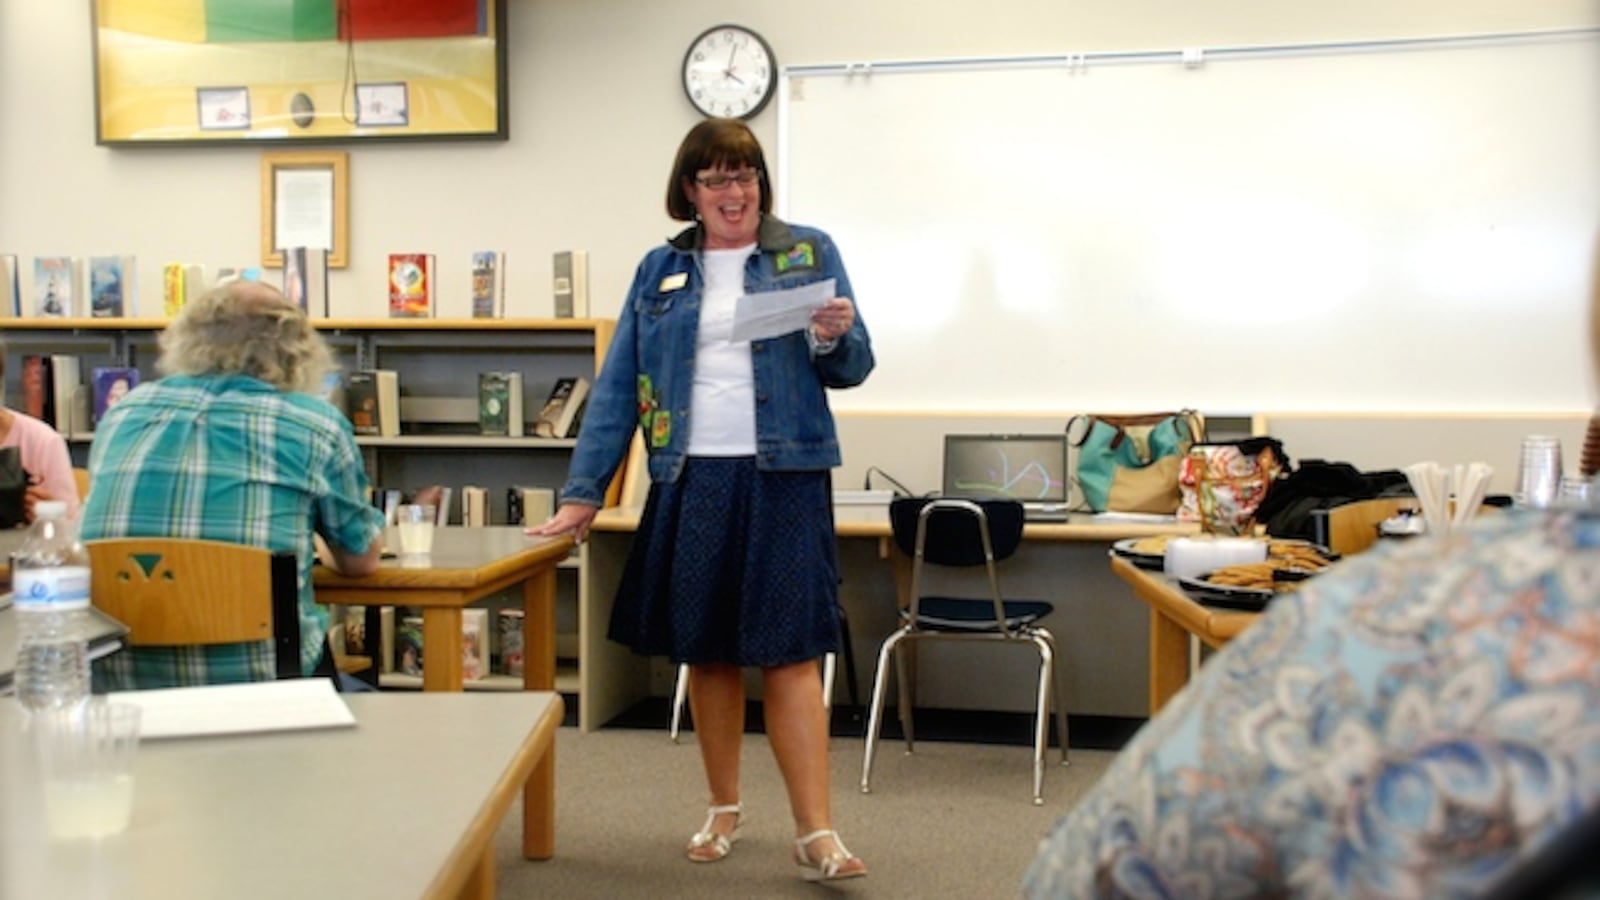 Jeffco Public Schools board member Jill Fellman hosted two meet and greets — like this one on May 15 at Wheat Ridge High School — with superintendent finalist Dan McMinimee. Fellman is a member of the board’s minority.